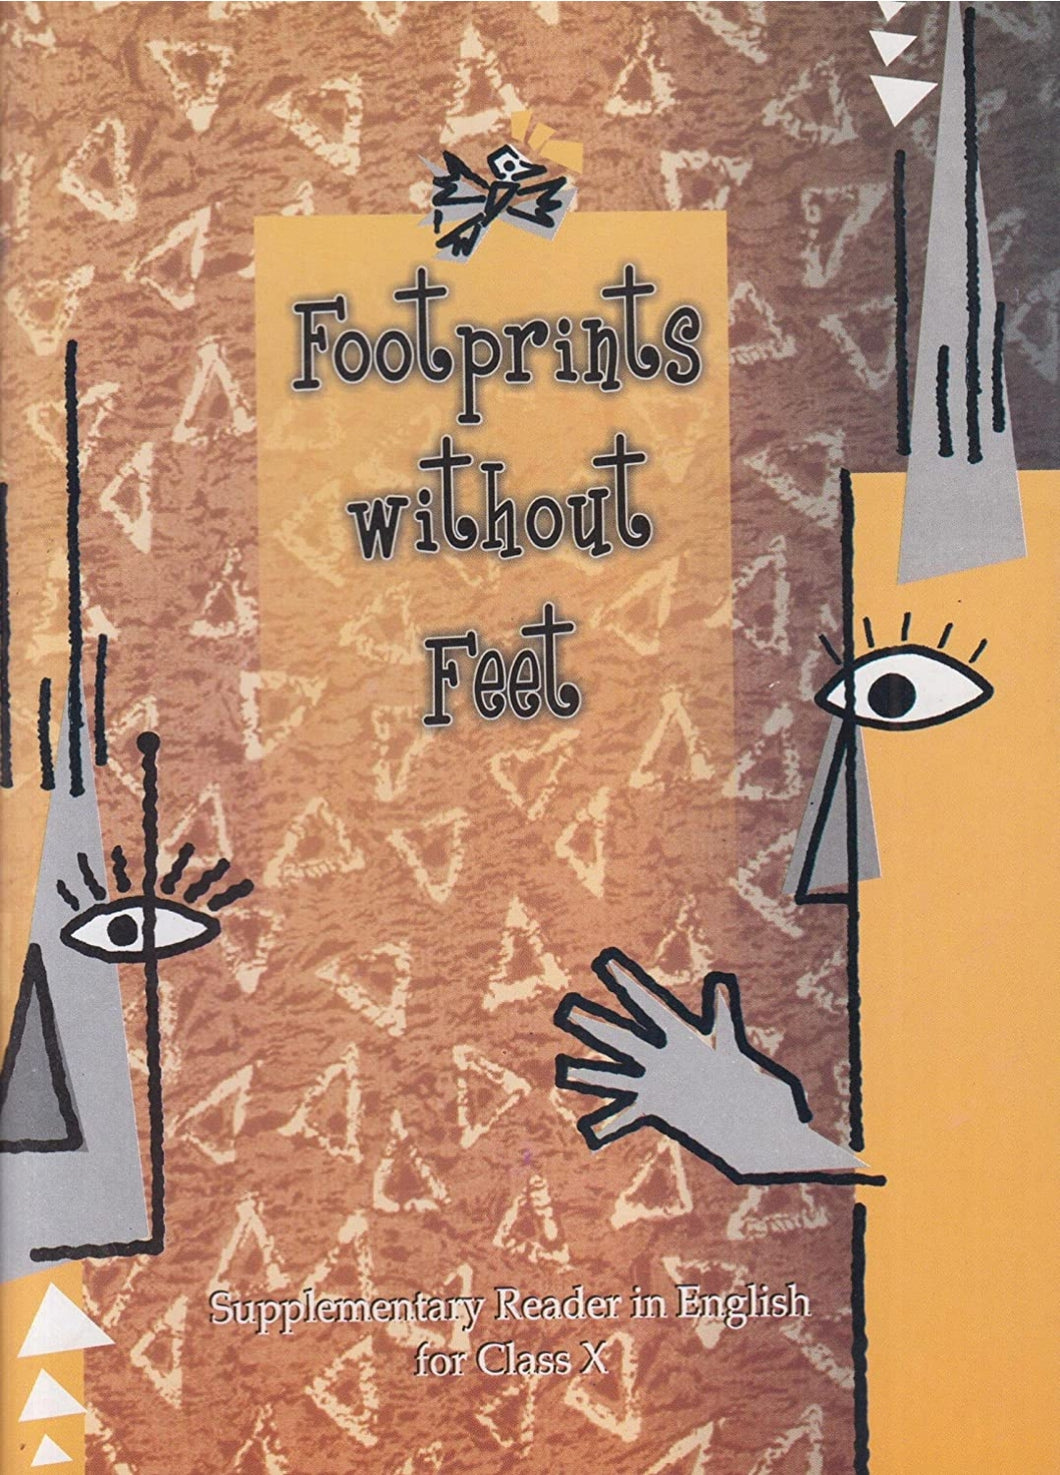 NCERT Footprints without Feet - English Supplementary Reader for Class 10 - latest edition as per NCERT/CBSE - Booksfy